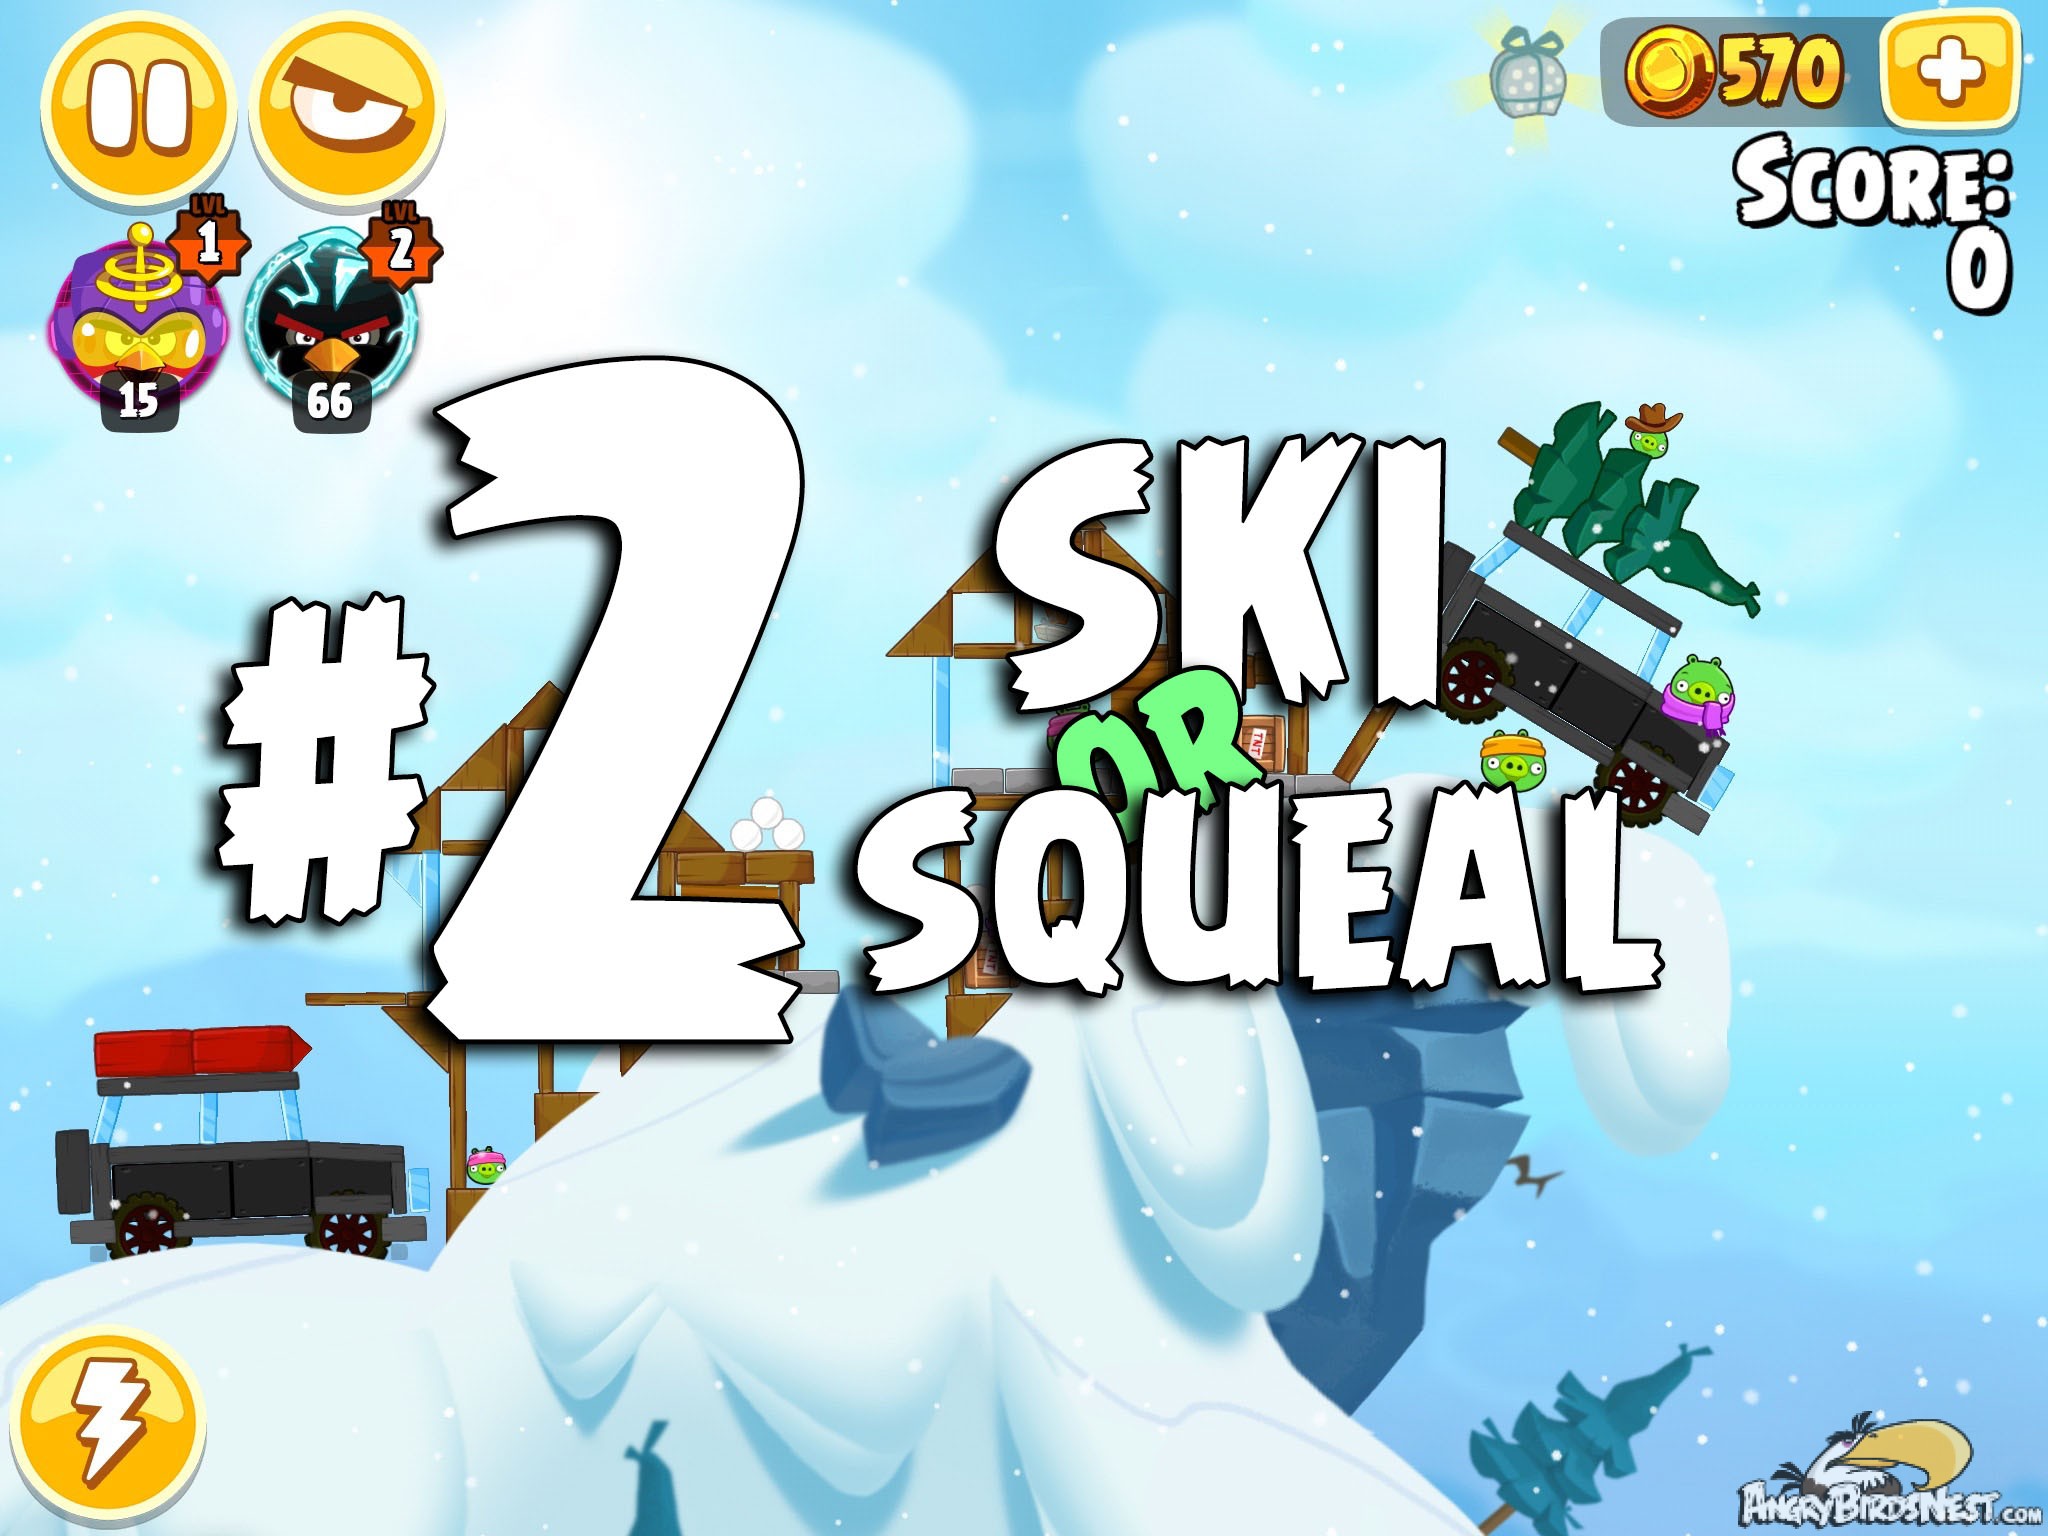 Angry Birds Seasons Ski or Squeal Level 1-2